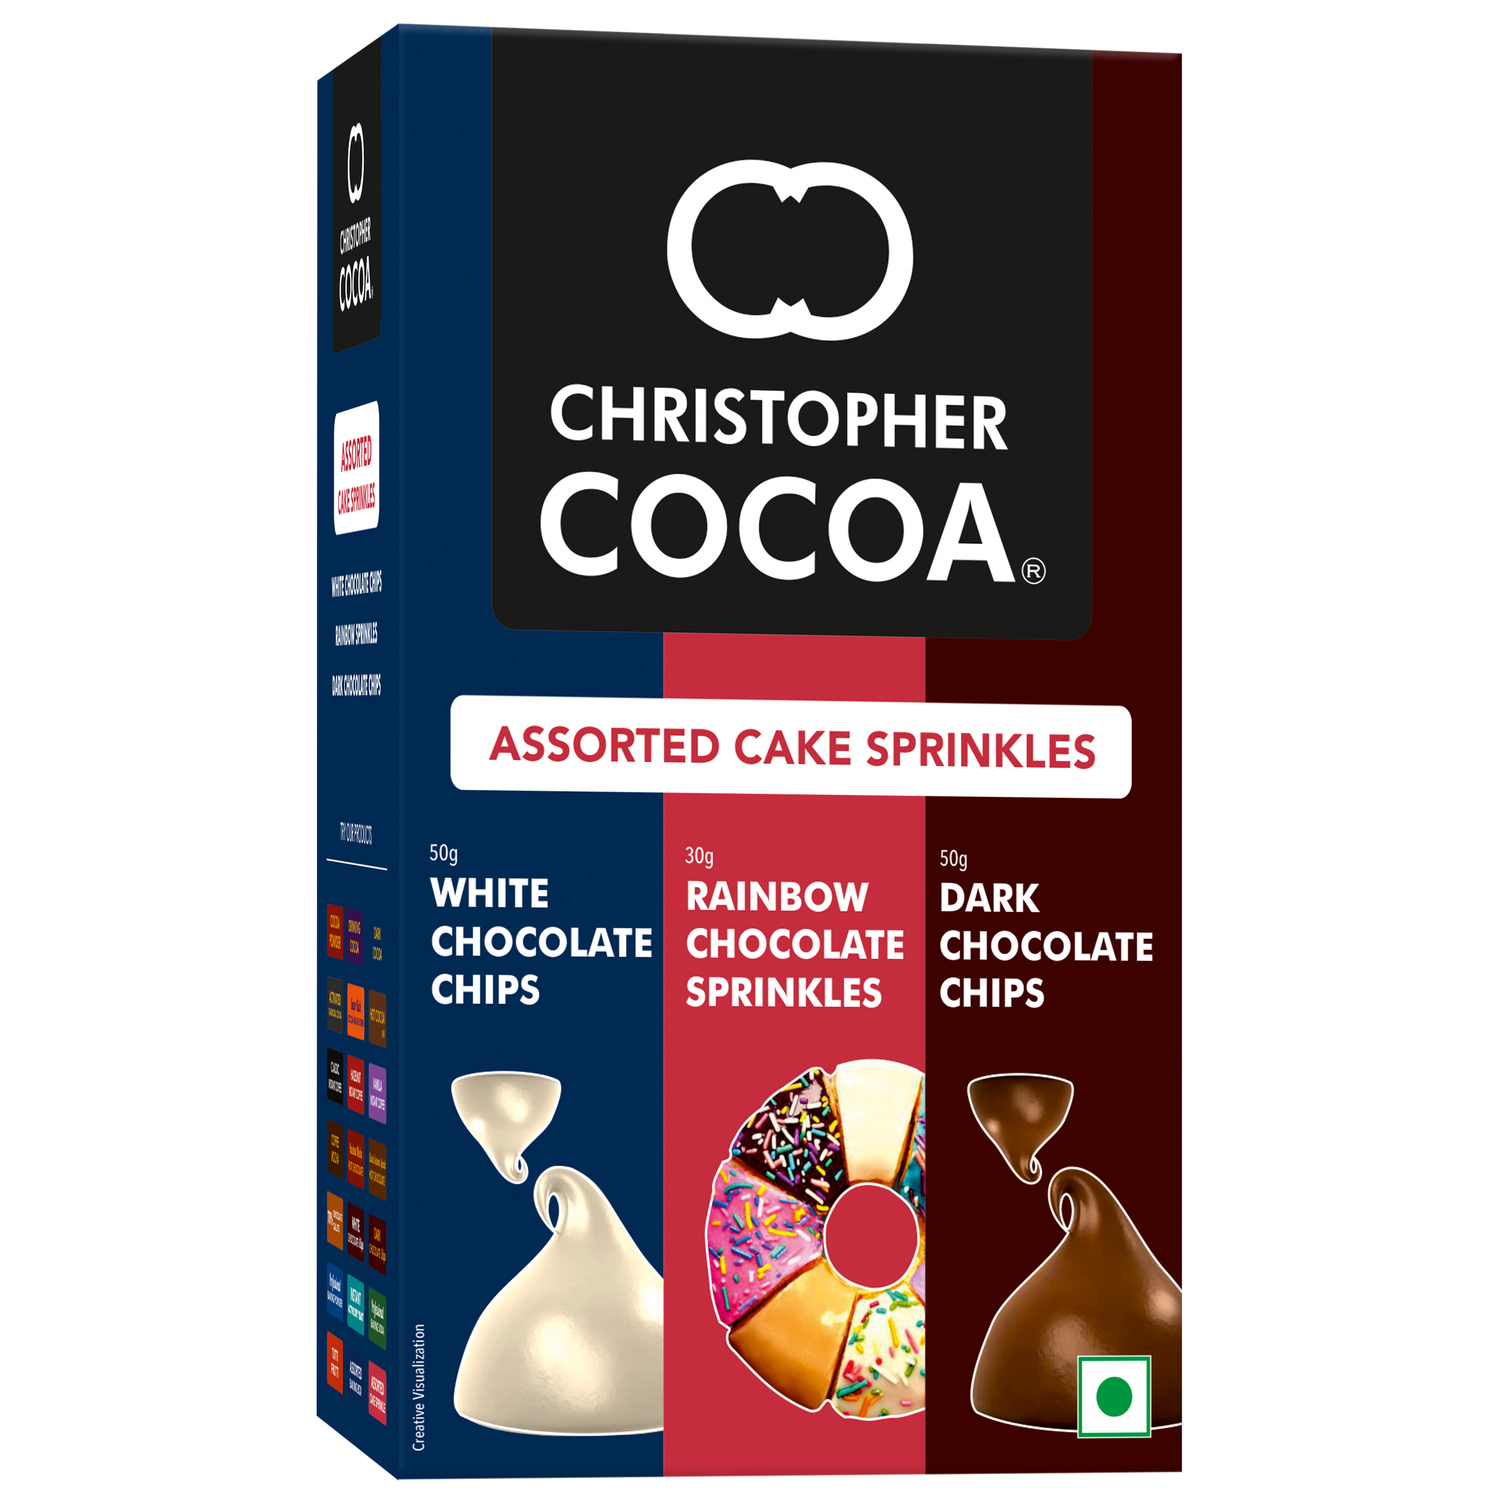 Christopher Cocoa Assorted Cake  Sprinkles Dark Chocolate Chips 50g, White Chocolate Chips 50g, Rainbow Chocolate sprinkles 30g  (Snack, Topping Ice Cream, Cakes, Baking) 